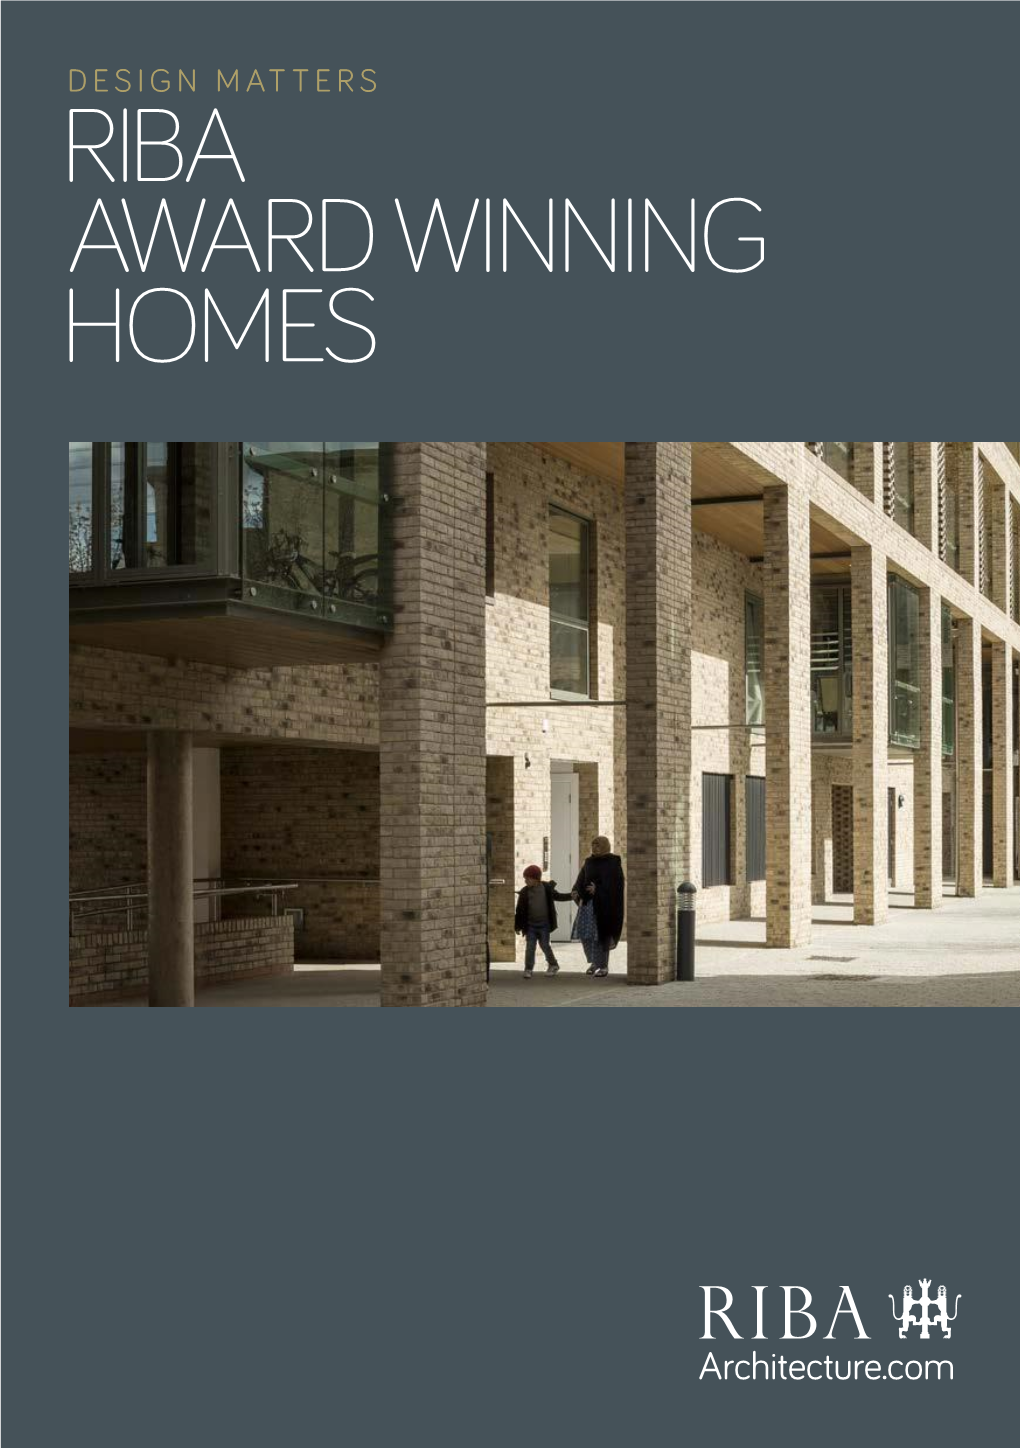 RIBA AWARD WINNING HOMES the Need to Deliver More Housing Is an Issue That Connects People from All Walks of Life